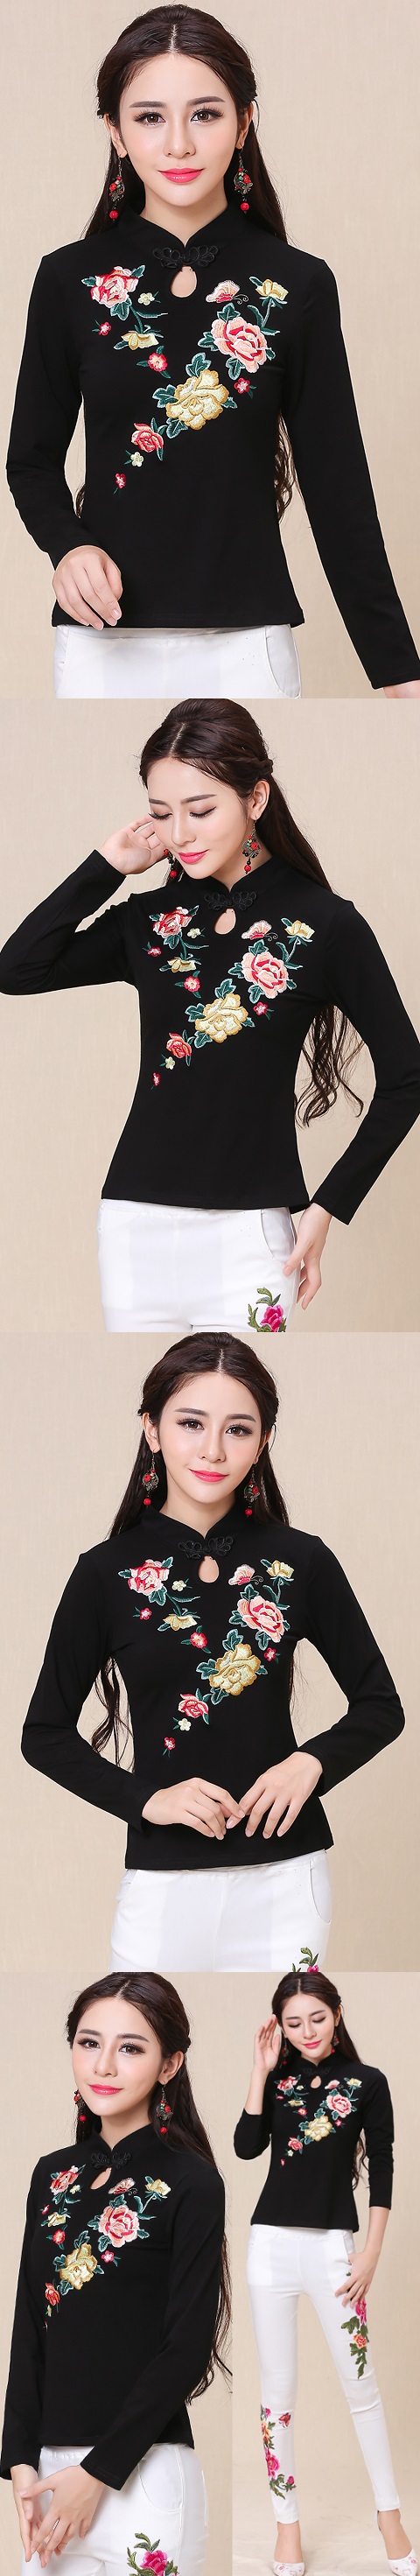 Ethnic Floral Embroidery Long-sleeve Blouse - Black (RM)